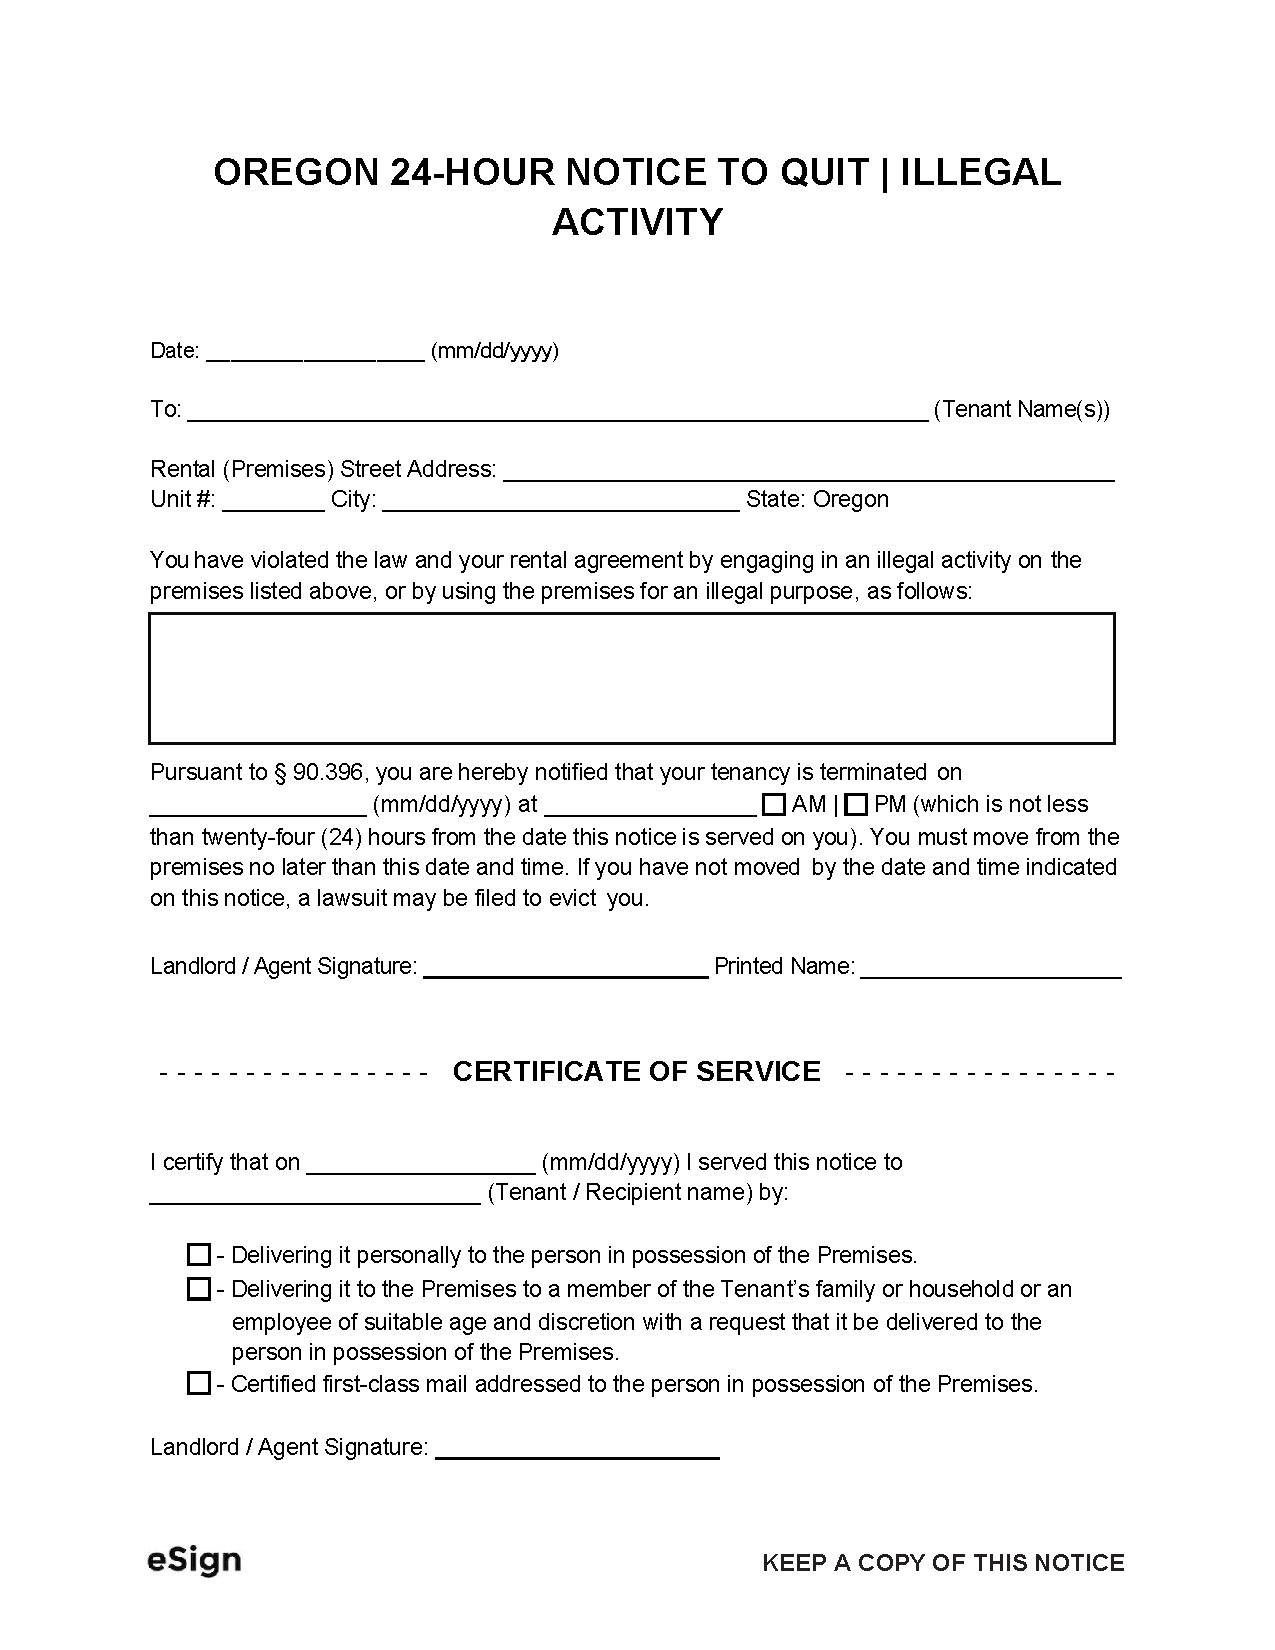 Free Oregon 24 Hour Notice to Quit Illegal Activity PDF Word